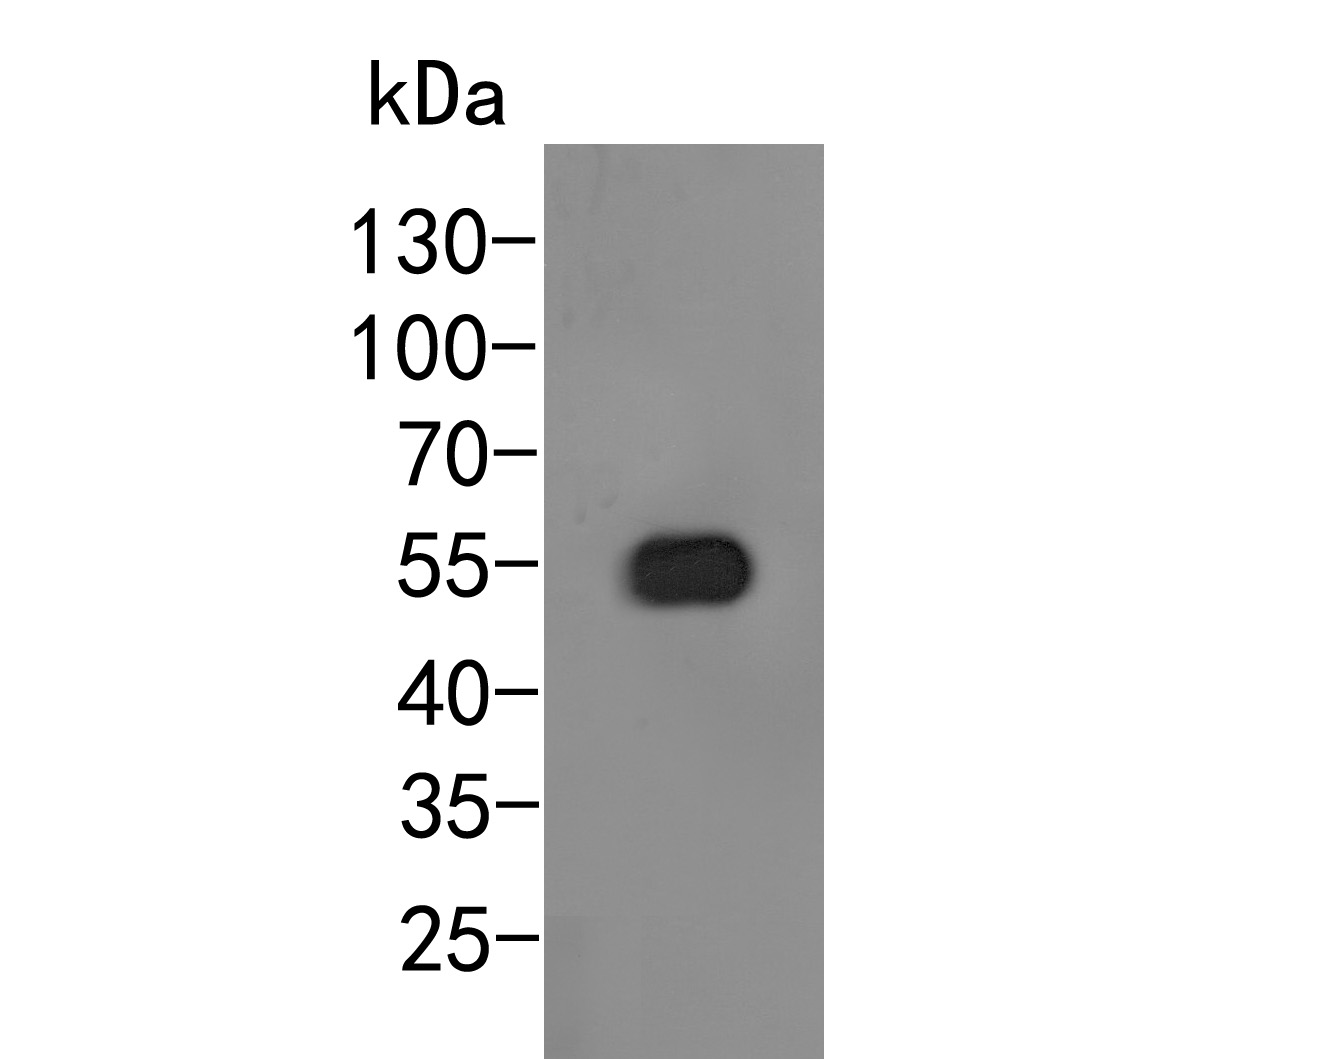 Western blot analysis of Arogenate dehydratase on Arabidopsis thaliana tissue lysates. Proteins were transferred to a PVDF membrane and blocked with 5% BSA in PBS for 1 hour at room temperature. The primary antibody (HA500108, 1/500) was used in 5% BSA at room temperature for 2 hours. Goat Anti-Rabbit IgG - HRP Secondary Antibody (HA1001) at 1:5,000 dilution was used for 1 hour at room temperature.